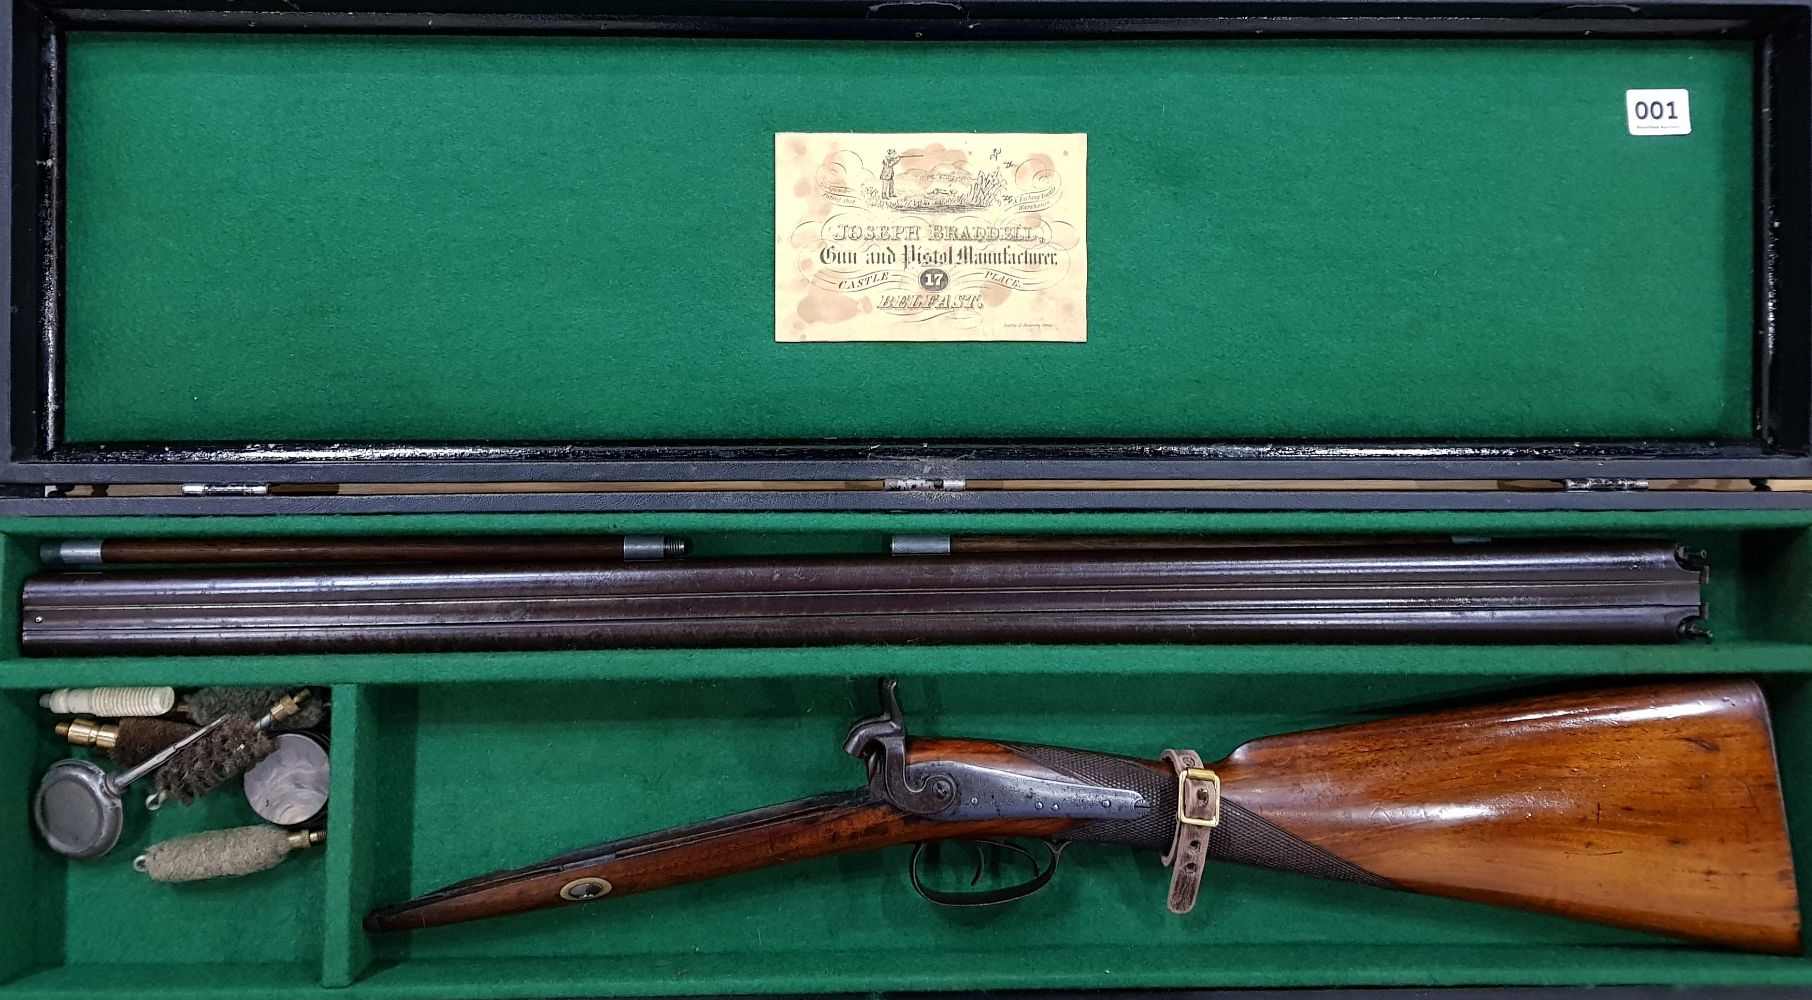 Michael Collins - Emmet Dalton Sale To Include Other Militaria & Police Items